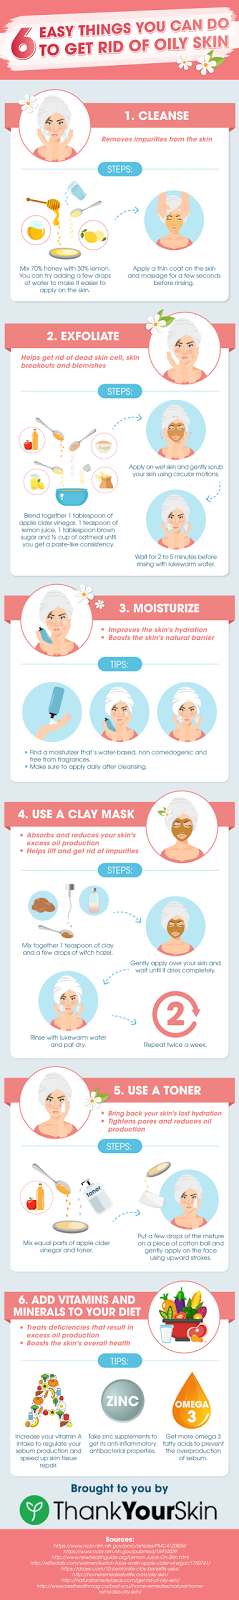 6 Easy Things You Can Do To Get Rid Of Oily Skin